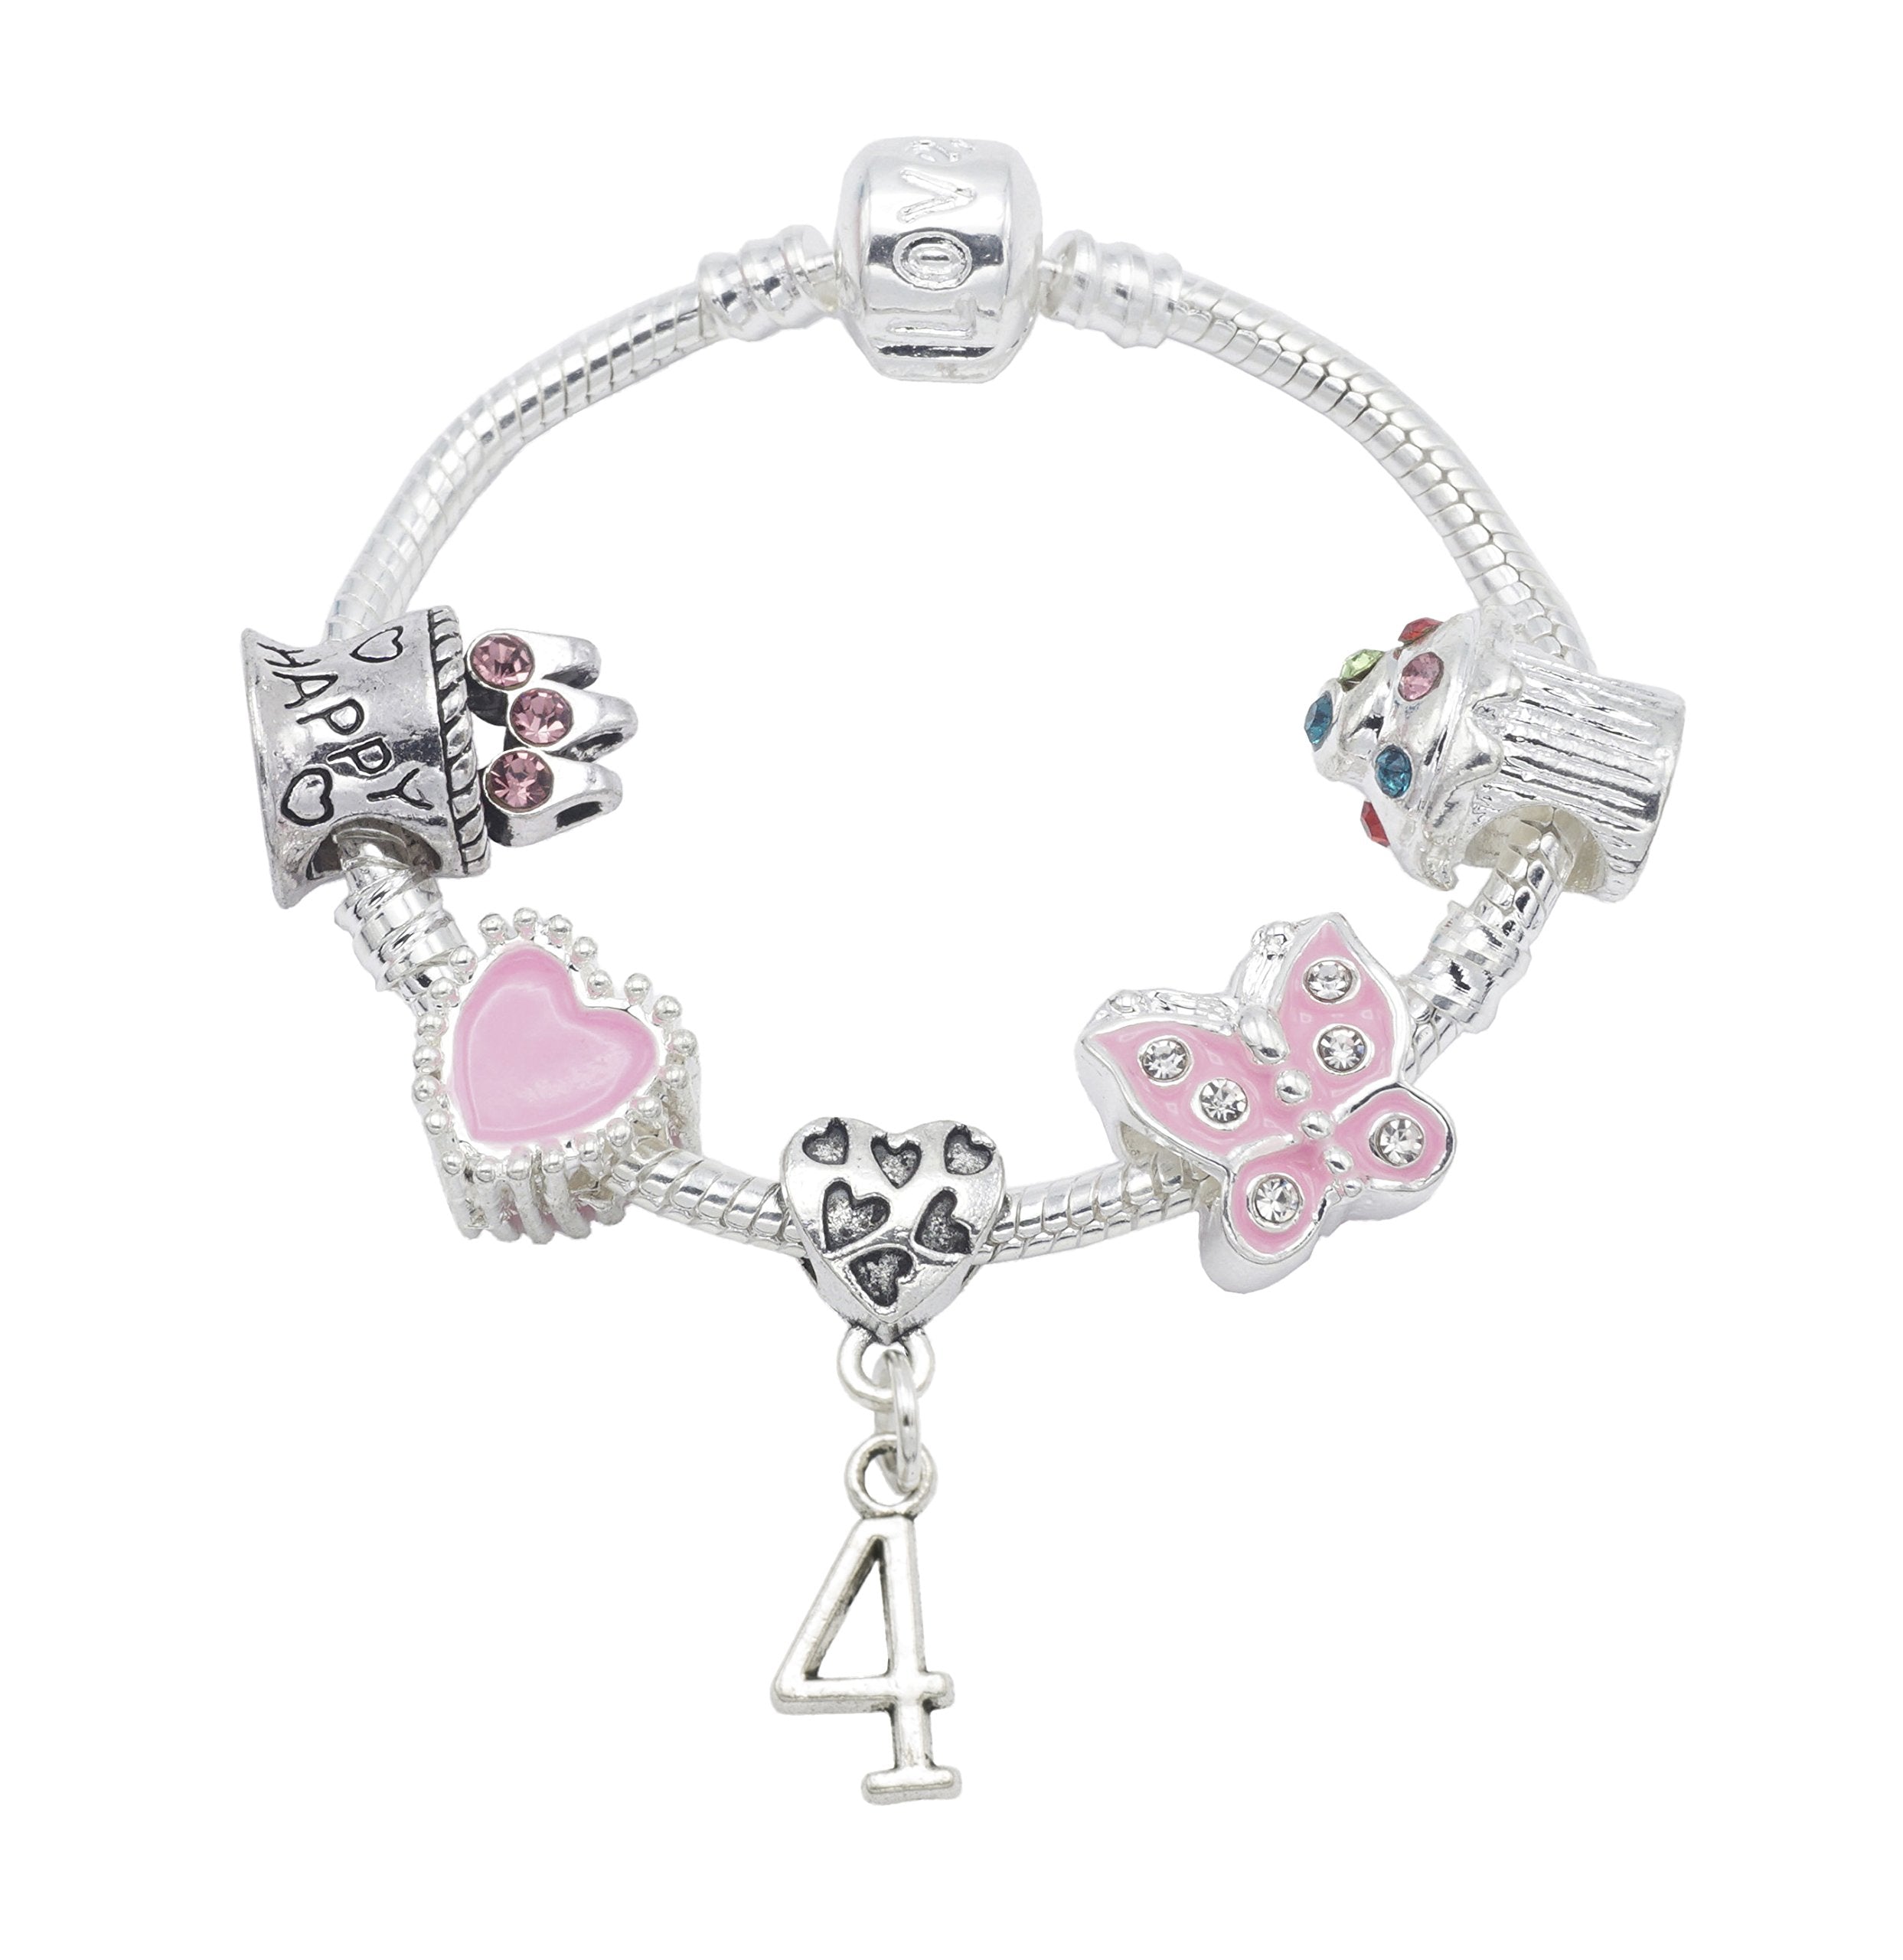 4th Birthday Silver Plated Charm Bracelet for Girls with Gift Box